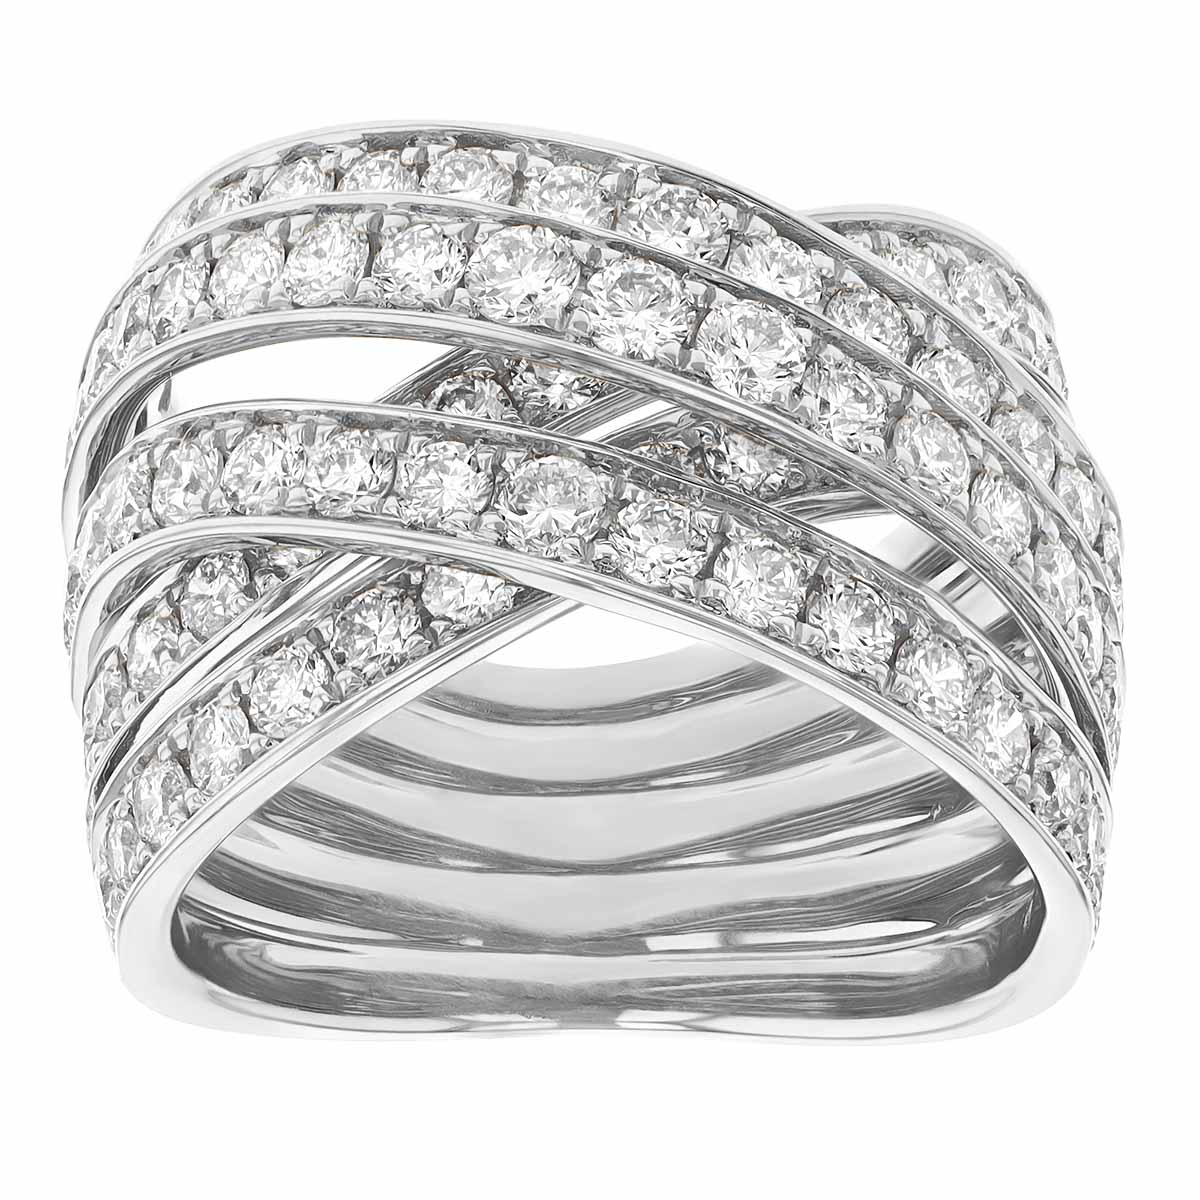 Diamond 5 Row Crossover Ring in White Gold | Borsheims